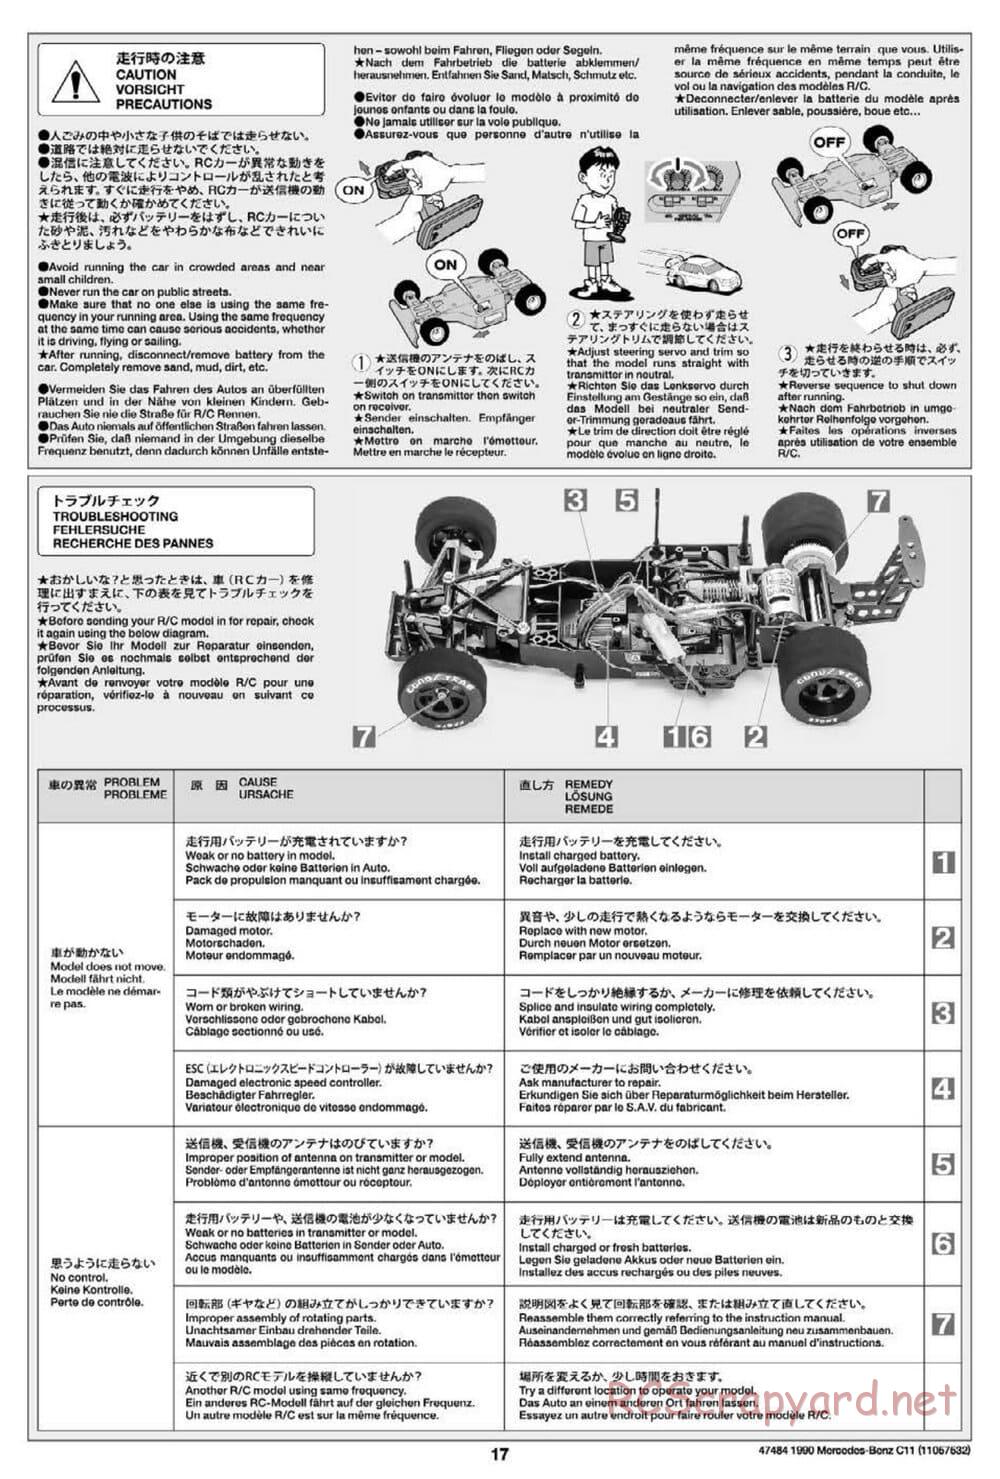 Tamiya - 1990 Mercedes-Benz C11 - Group-C Chassis - Manual - Page 17